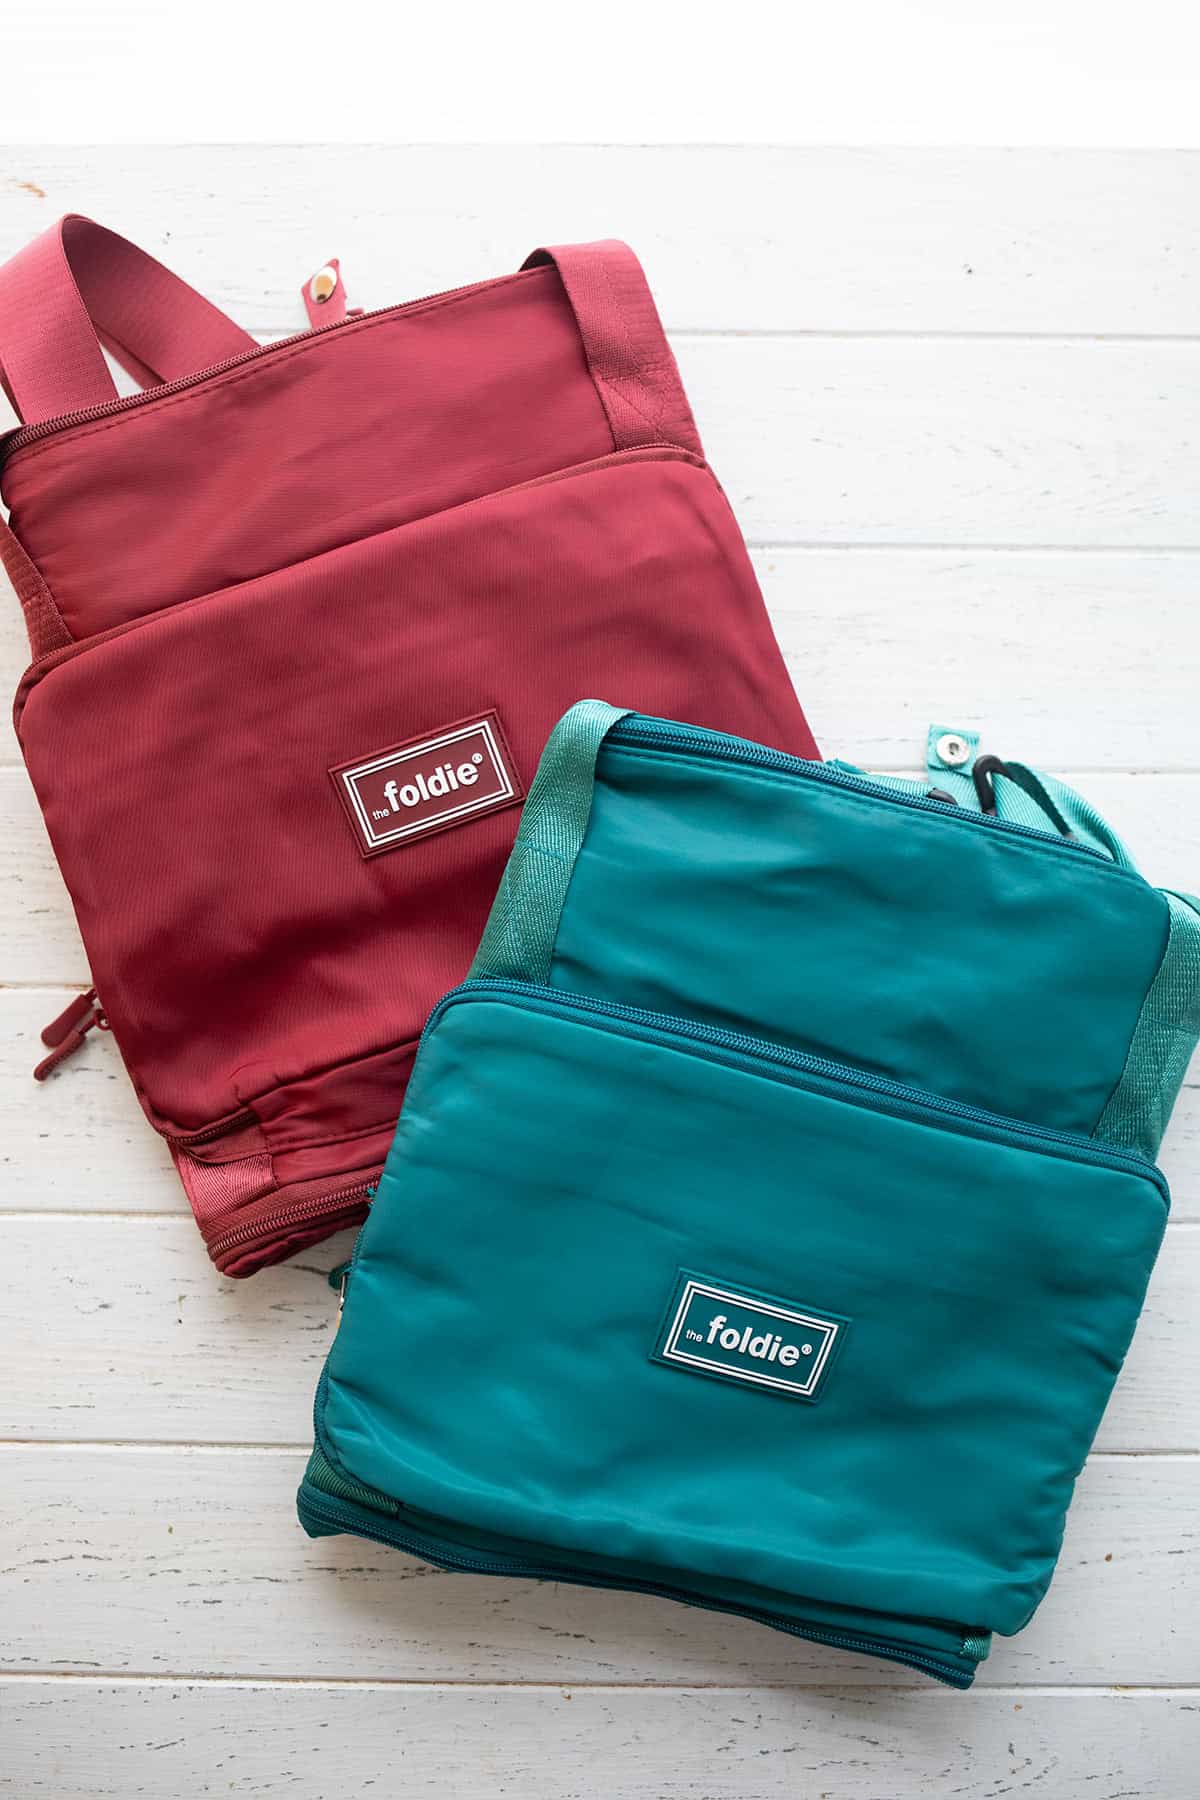 Top down image of two foldable Foldie tote bags, one in red and one in teal.